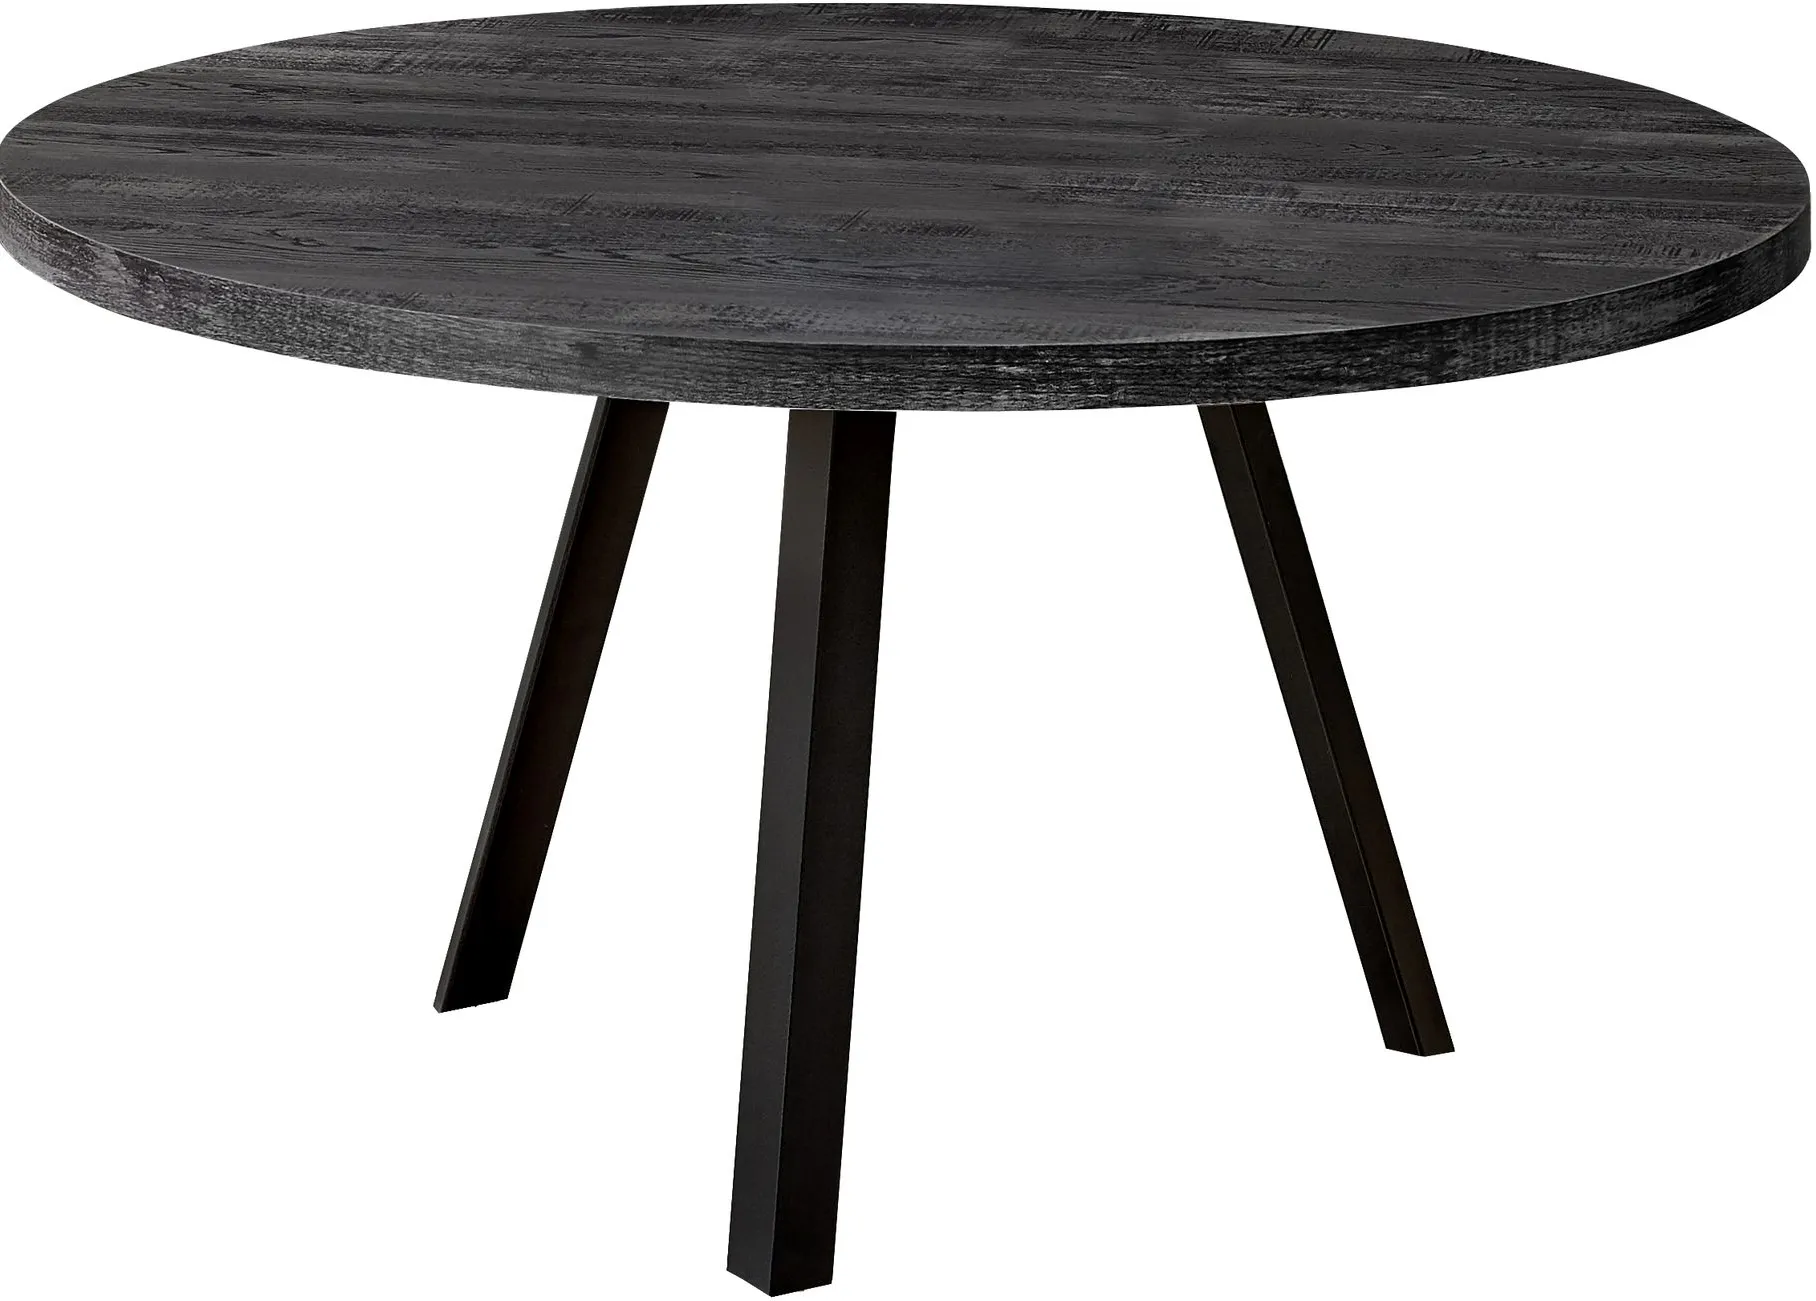 Coffee Table, Accent, Cocktail, Round, Living Room, 36"Dia, Metal, Laminate, Black, Contemporary, Modern